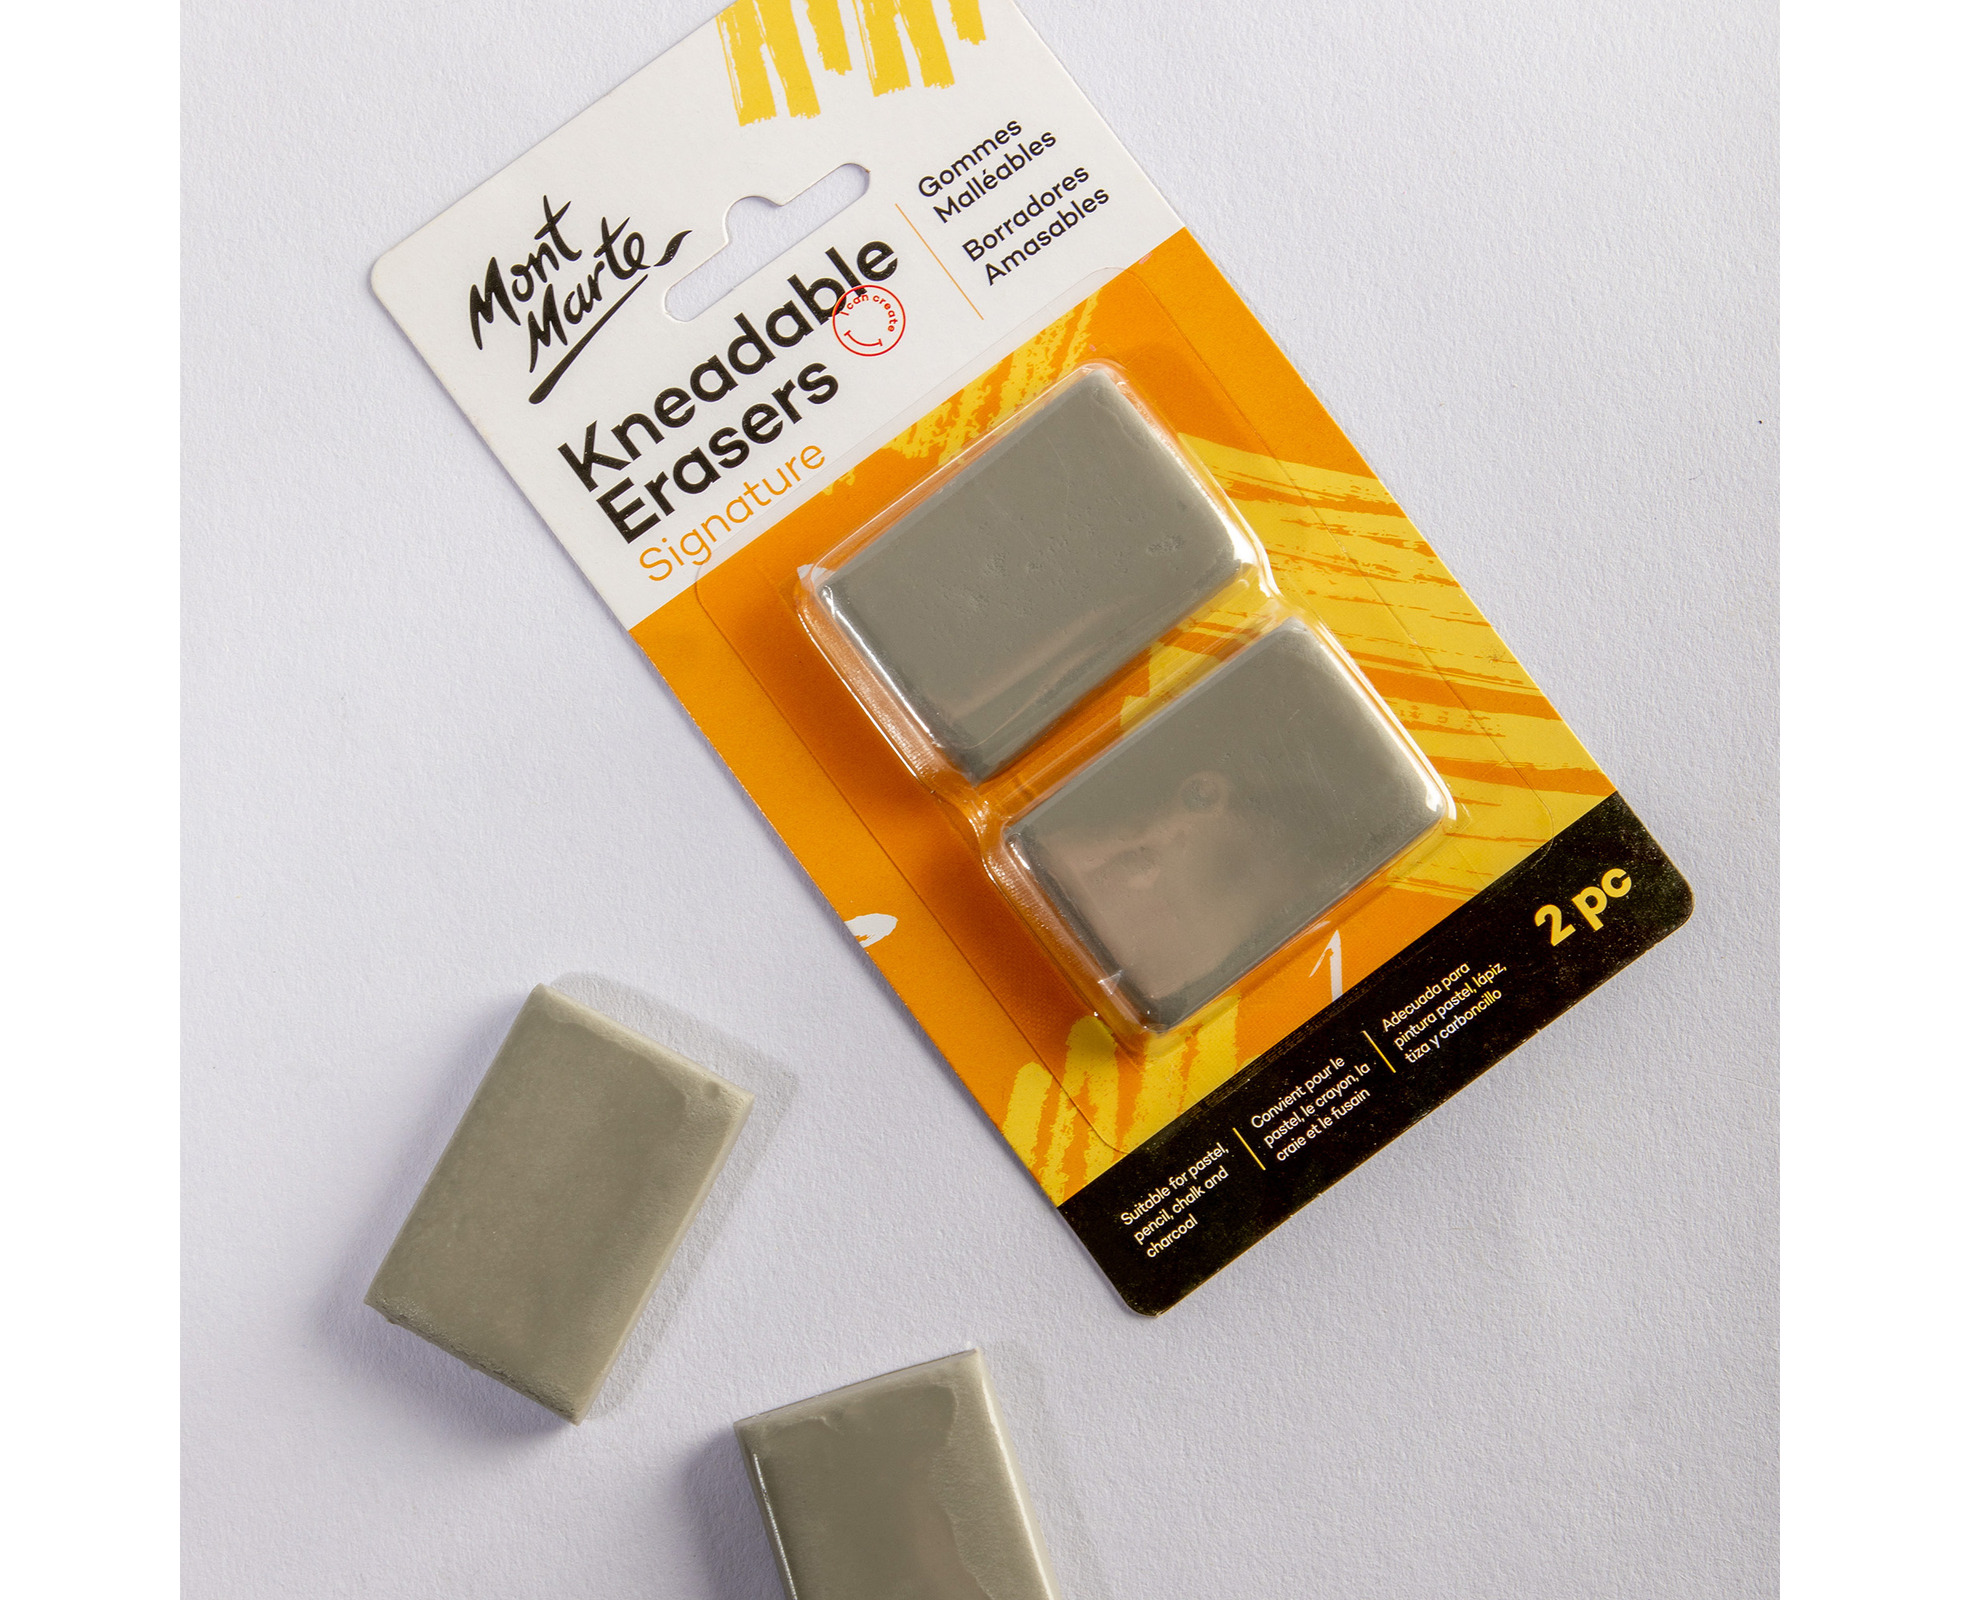 Mont Marte Kneadable Erasers Signature 2pc 4-Pack, Kneaded Erasers